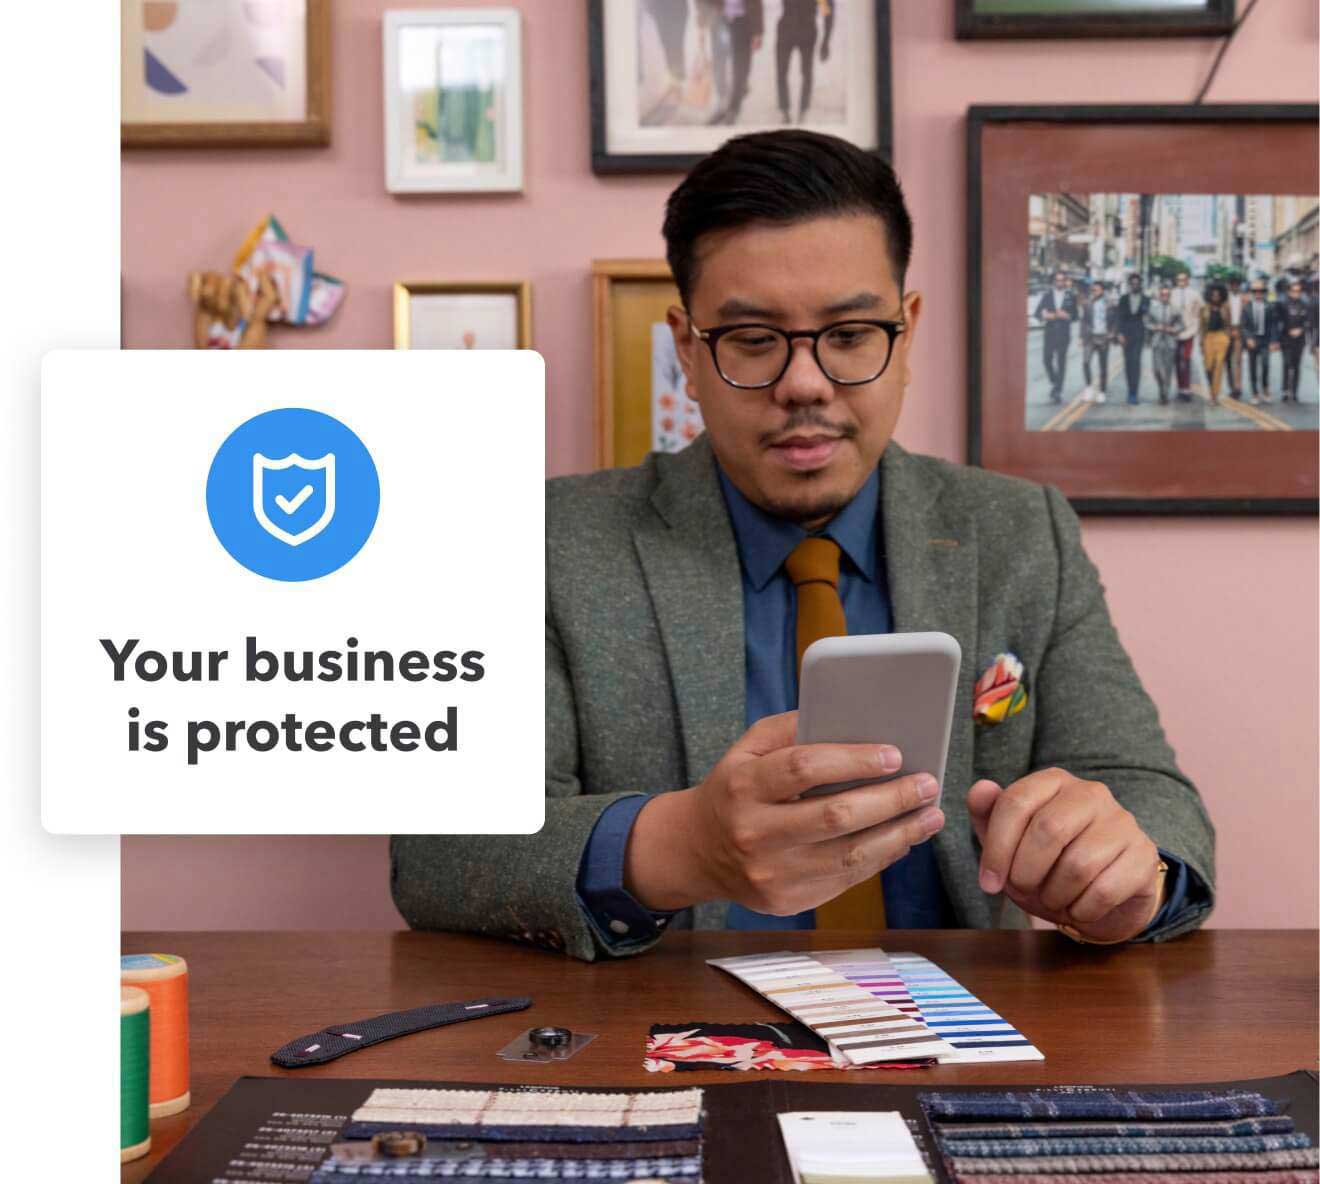 Business owner looking at email on his phone that says 'Your business is protected'